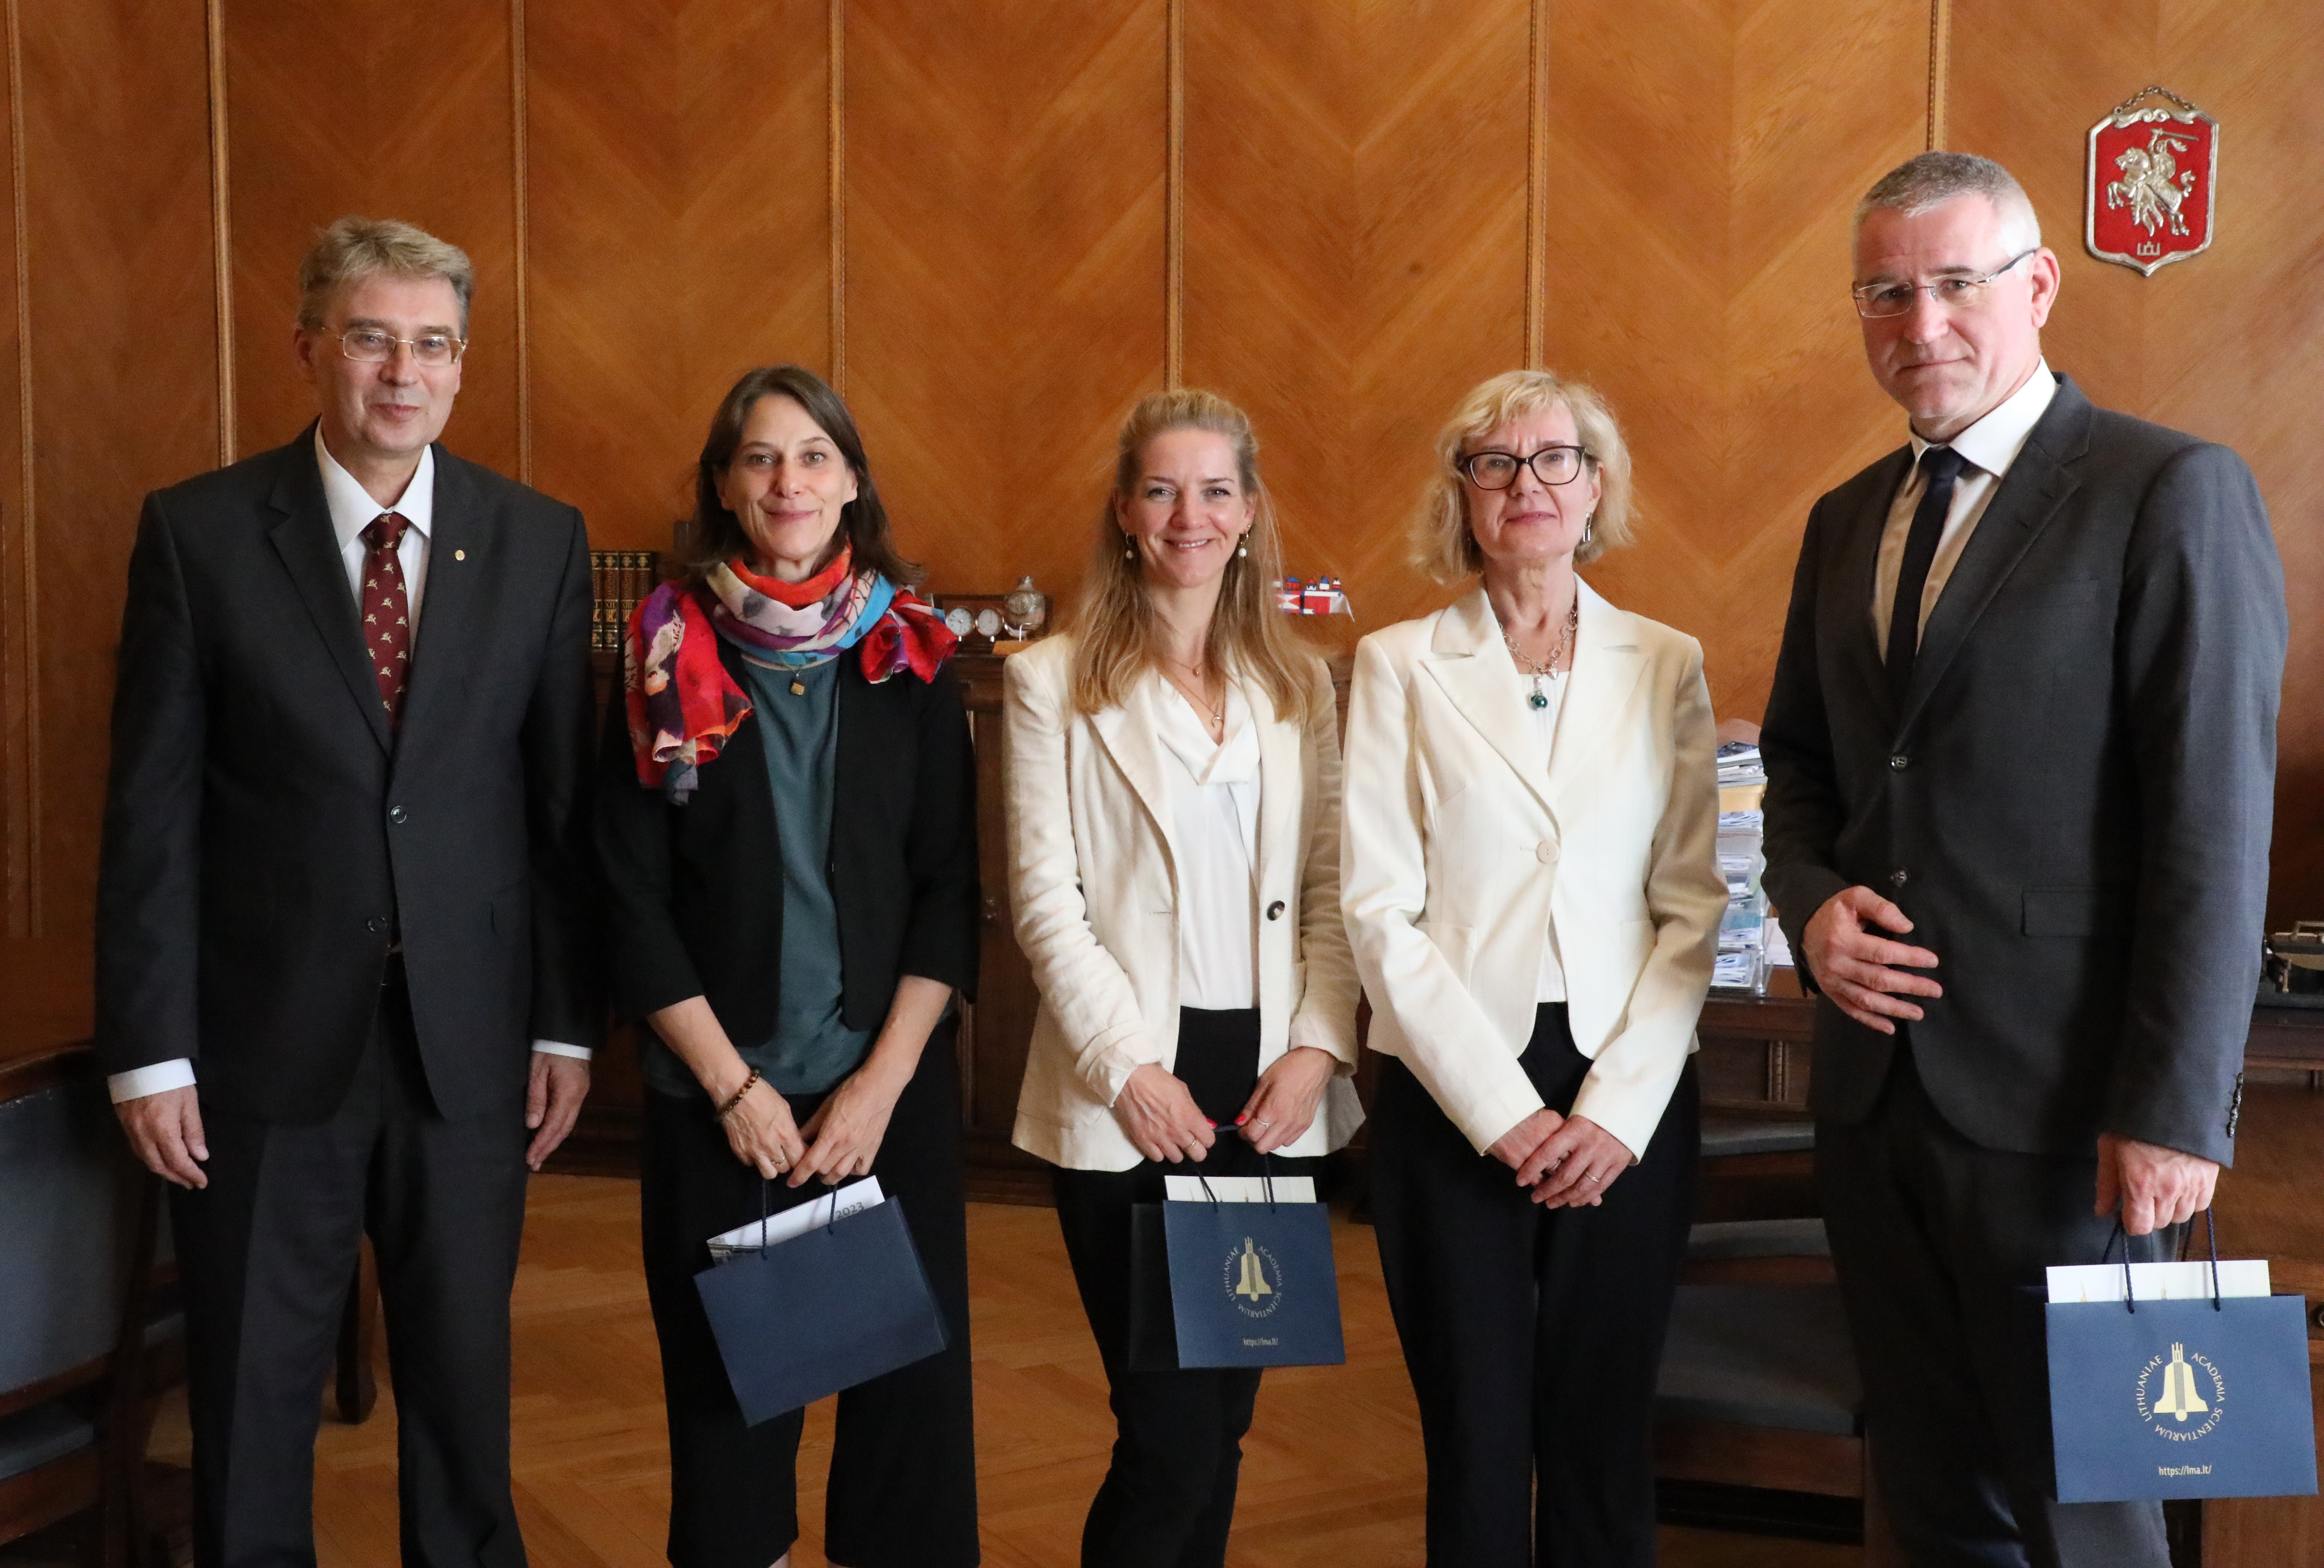 Meeting with the Lithuanian Academy of Sciences and the Academy President